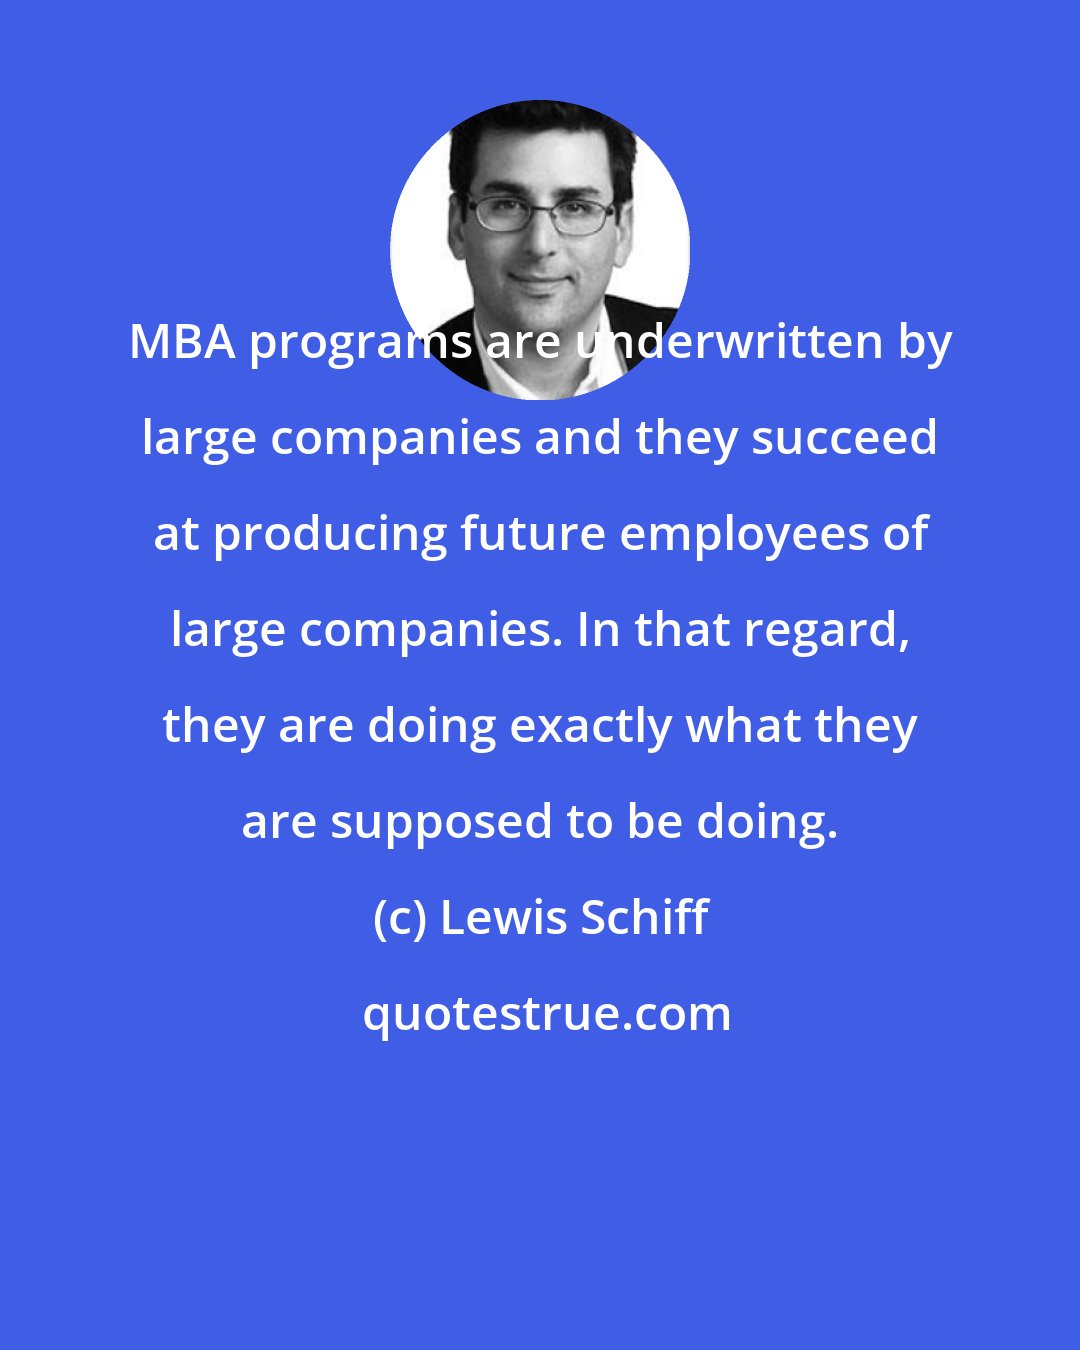 Lewis Schiff: MBA programs are underwritten by large companies and they succeed at producing future employees of large companies. In that regard, they are doing exactly what they are supposed to be doing.